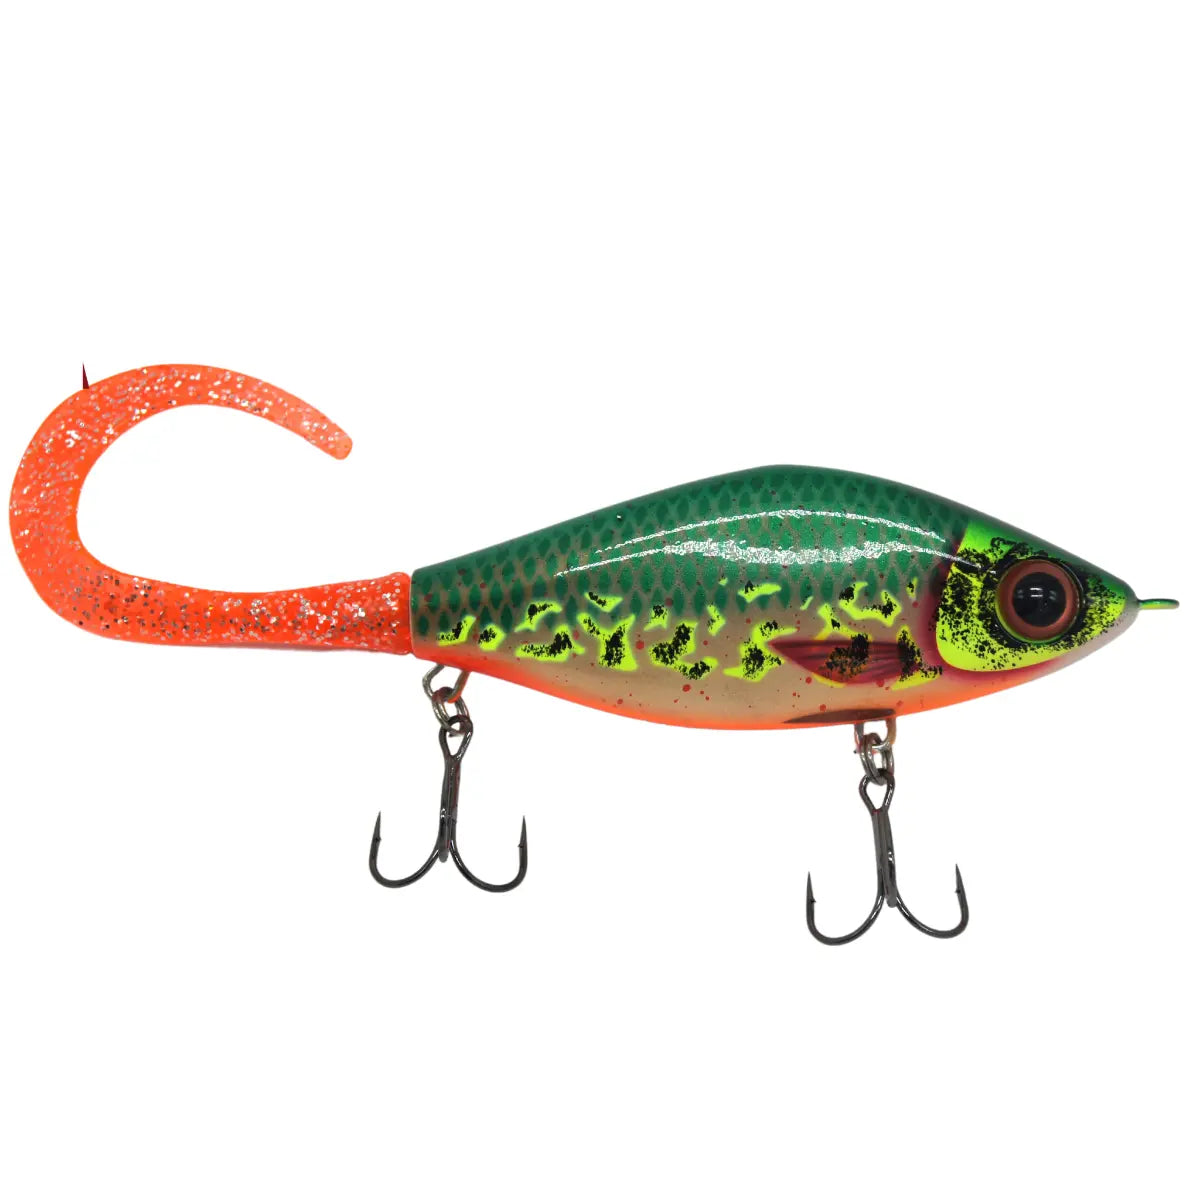 Strike Pro Guppie Jr. | Rugged Tackle The Saint / Shallow 58g - Fishing Baits & Lures - Rugged Tackle